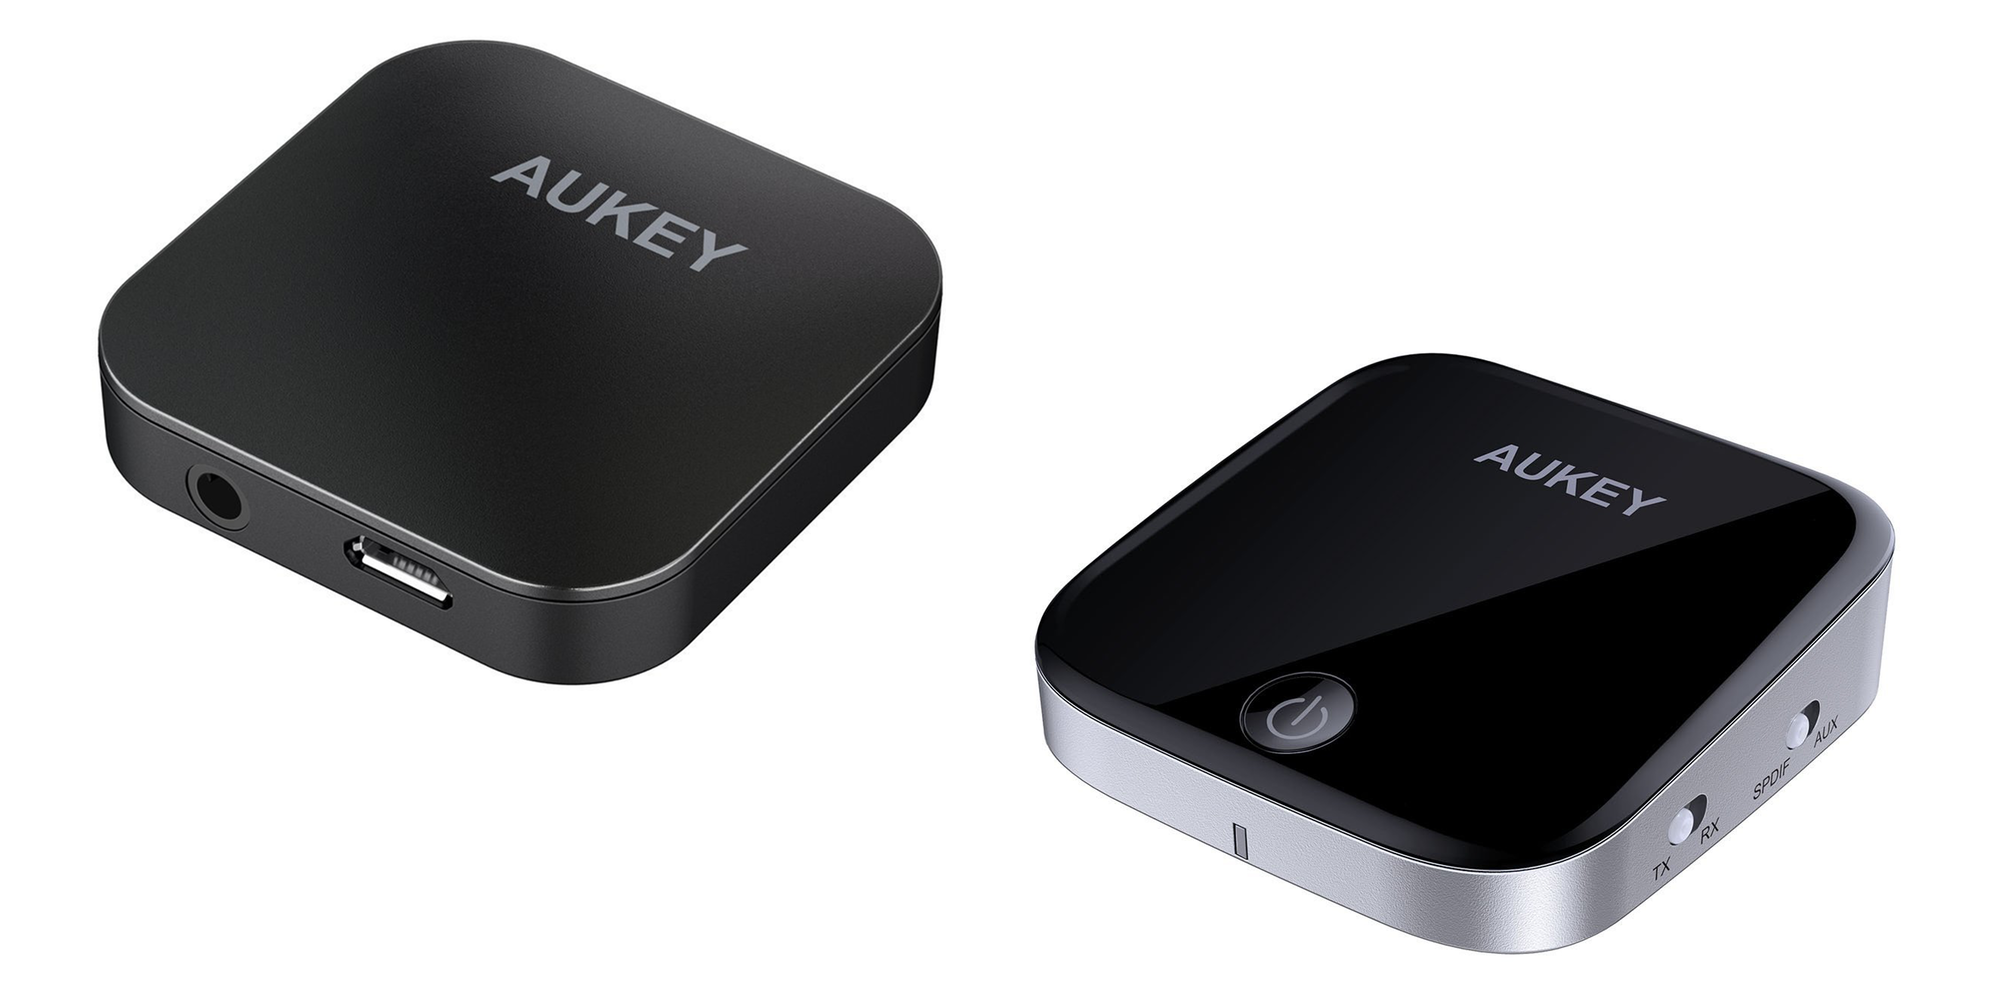 Smartphone Accessories: Aukey Bluetooth Transmitter/Receiver from